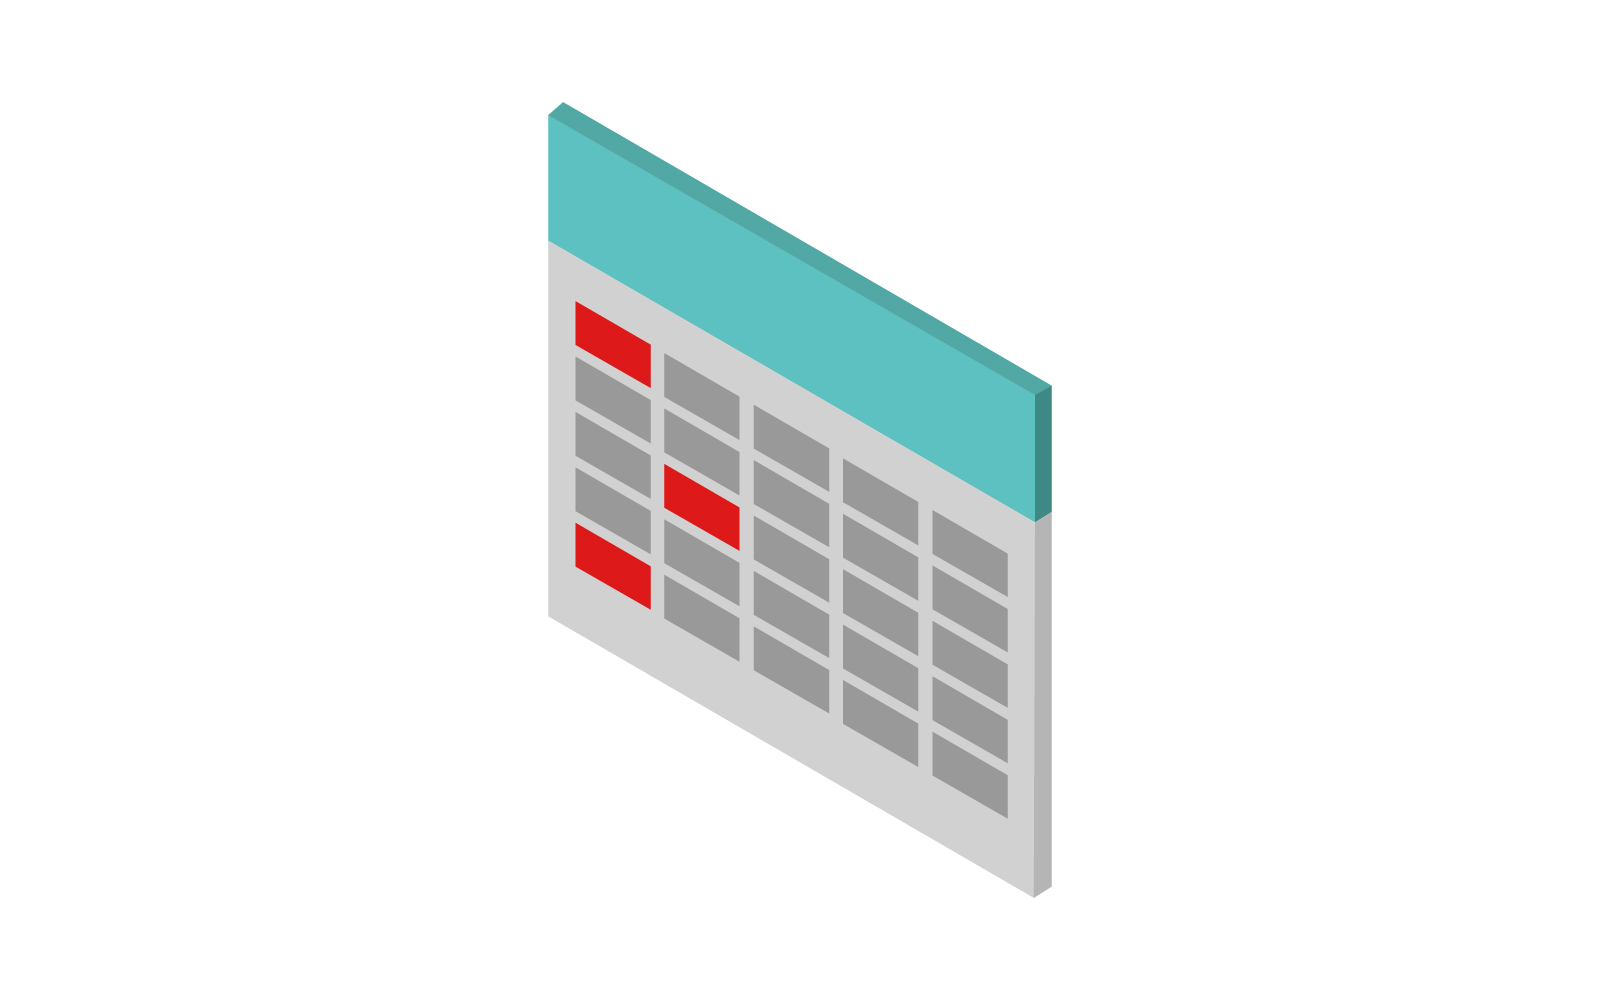 Isometric calendar illustrated on a white background